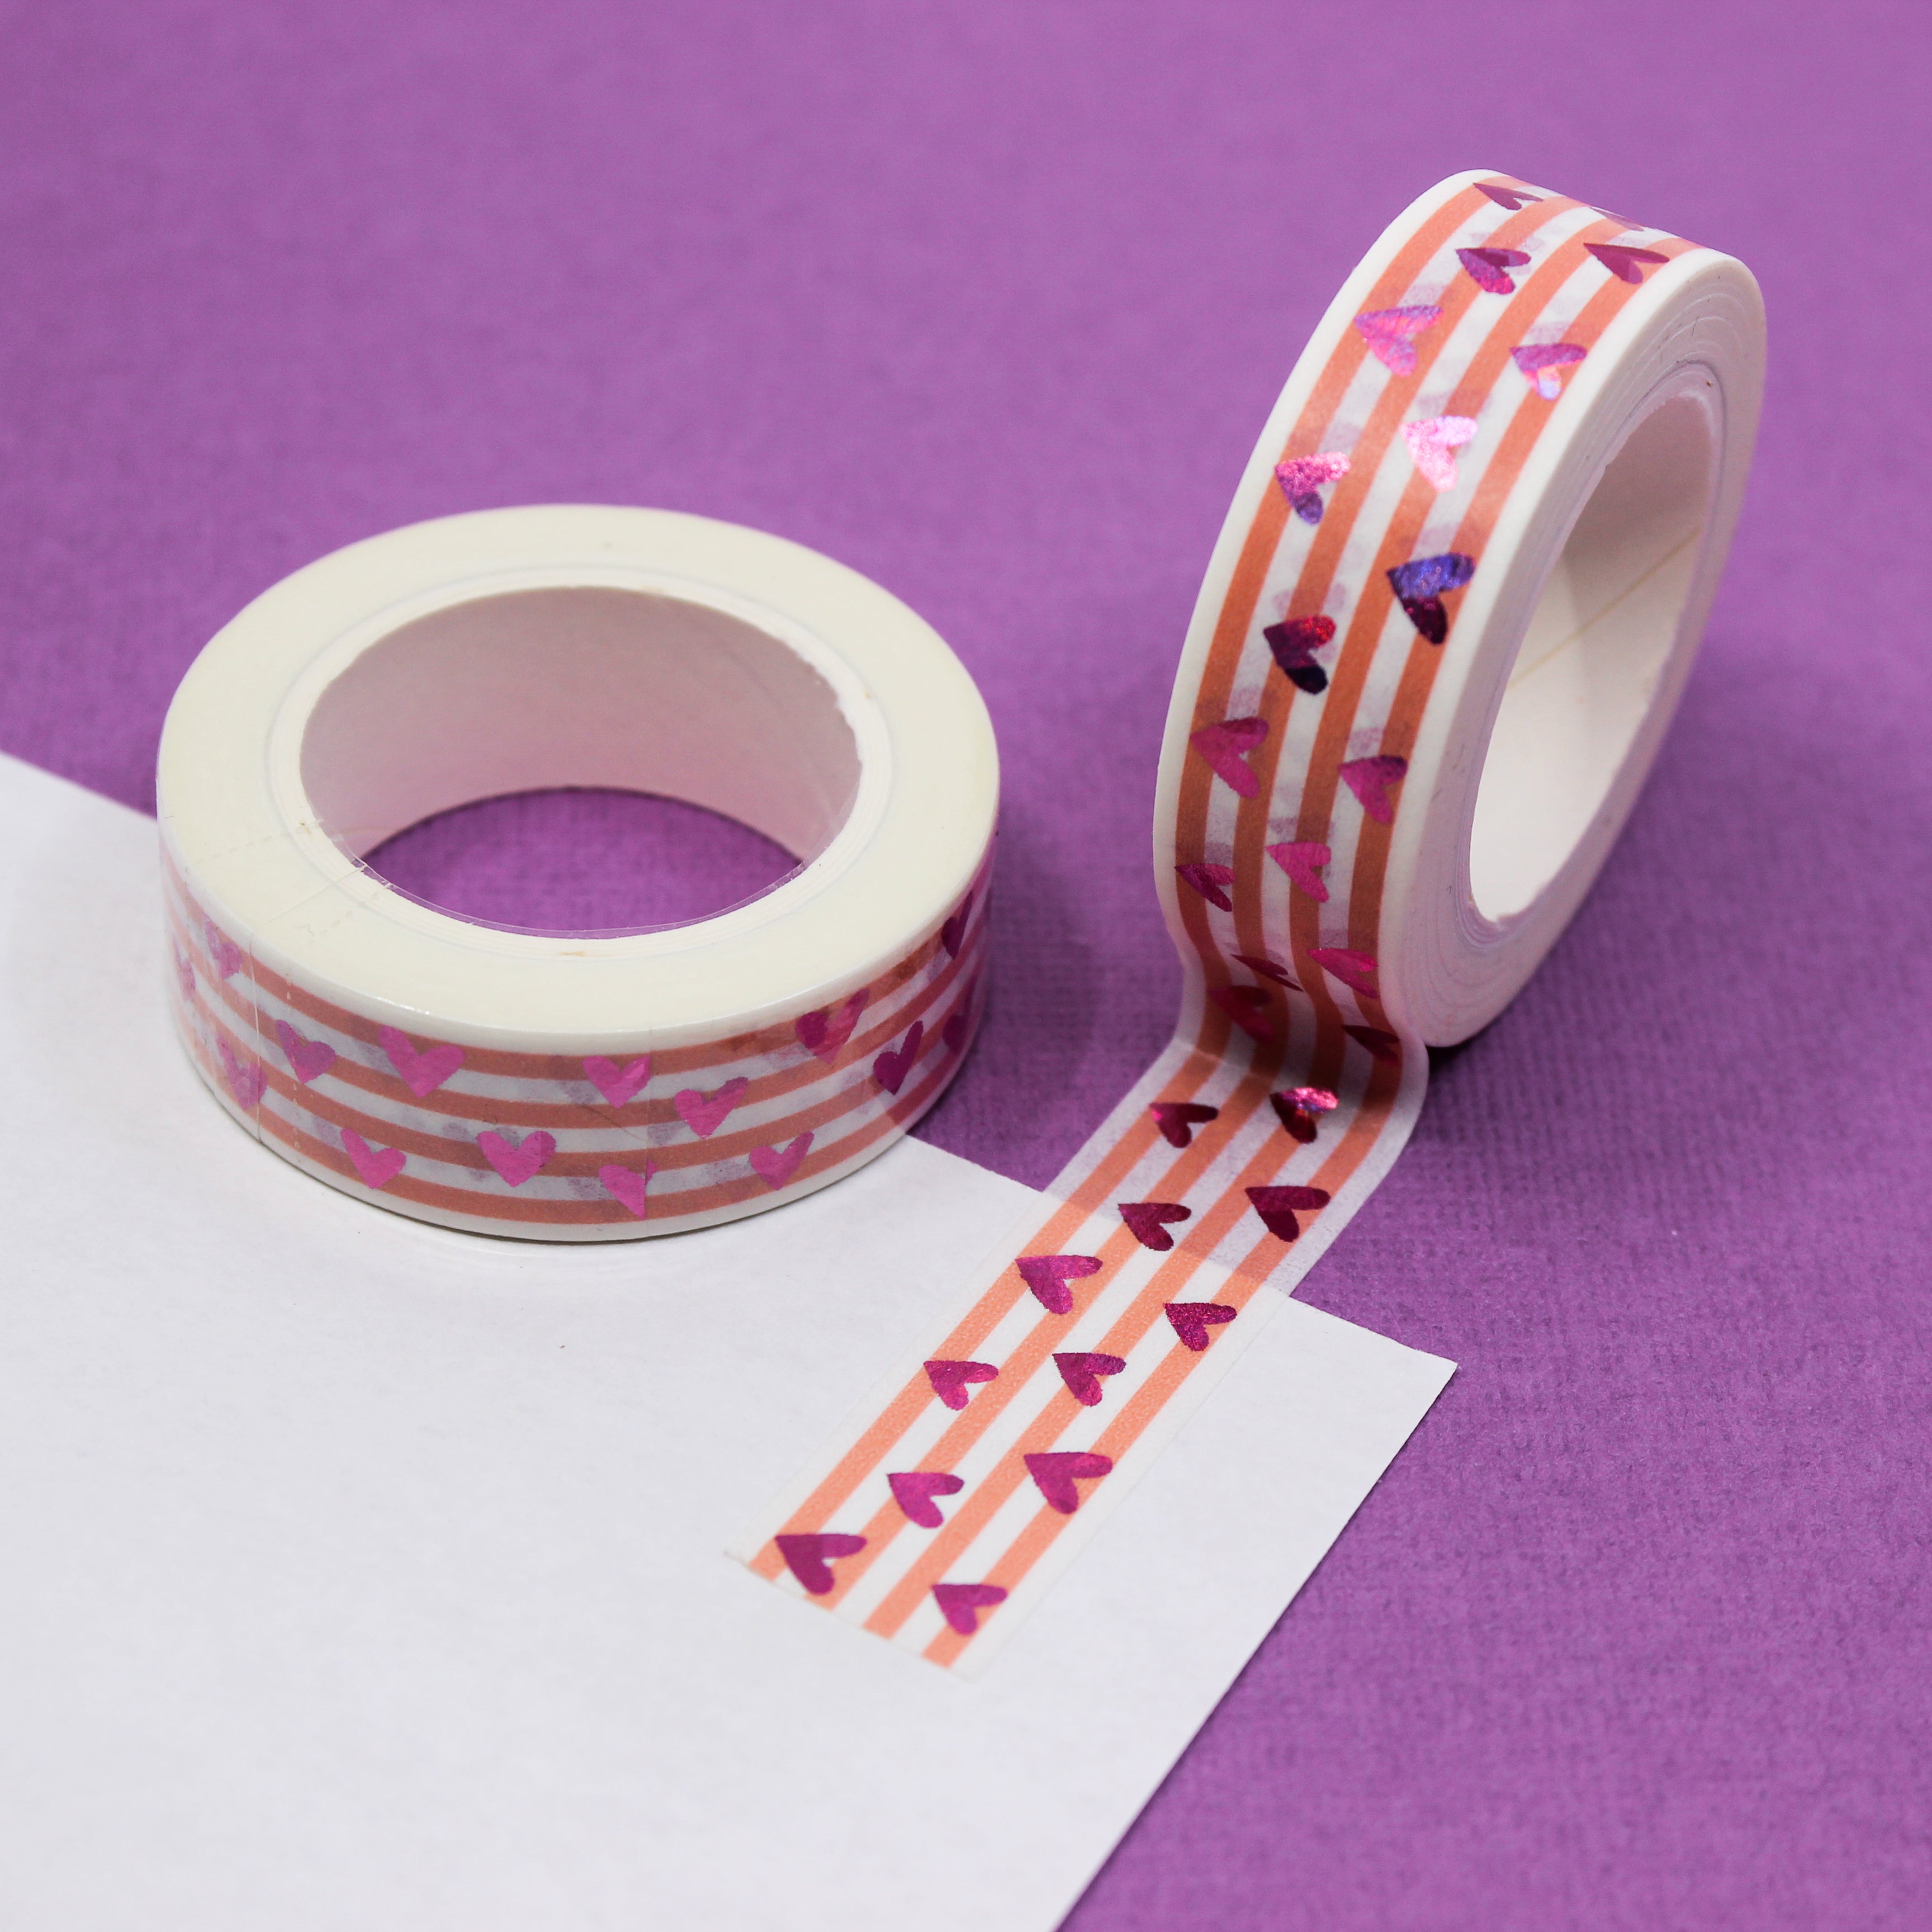 This vibrant pink foil heart washi tape features a narrow pink stripe as a backdrop making it a colorful but elegant choice for your valentines spreads, craft projects, and BUJO layouts. This tape is sold at BBB Supplies craft shop.